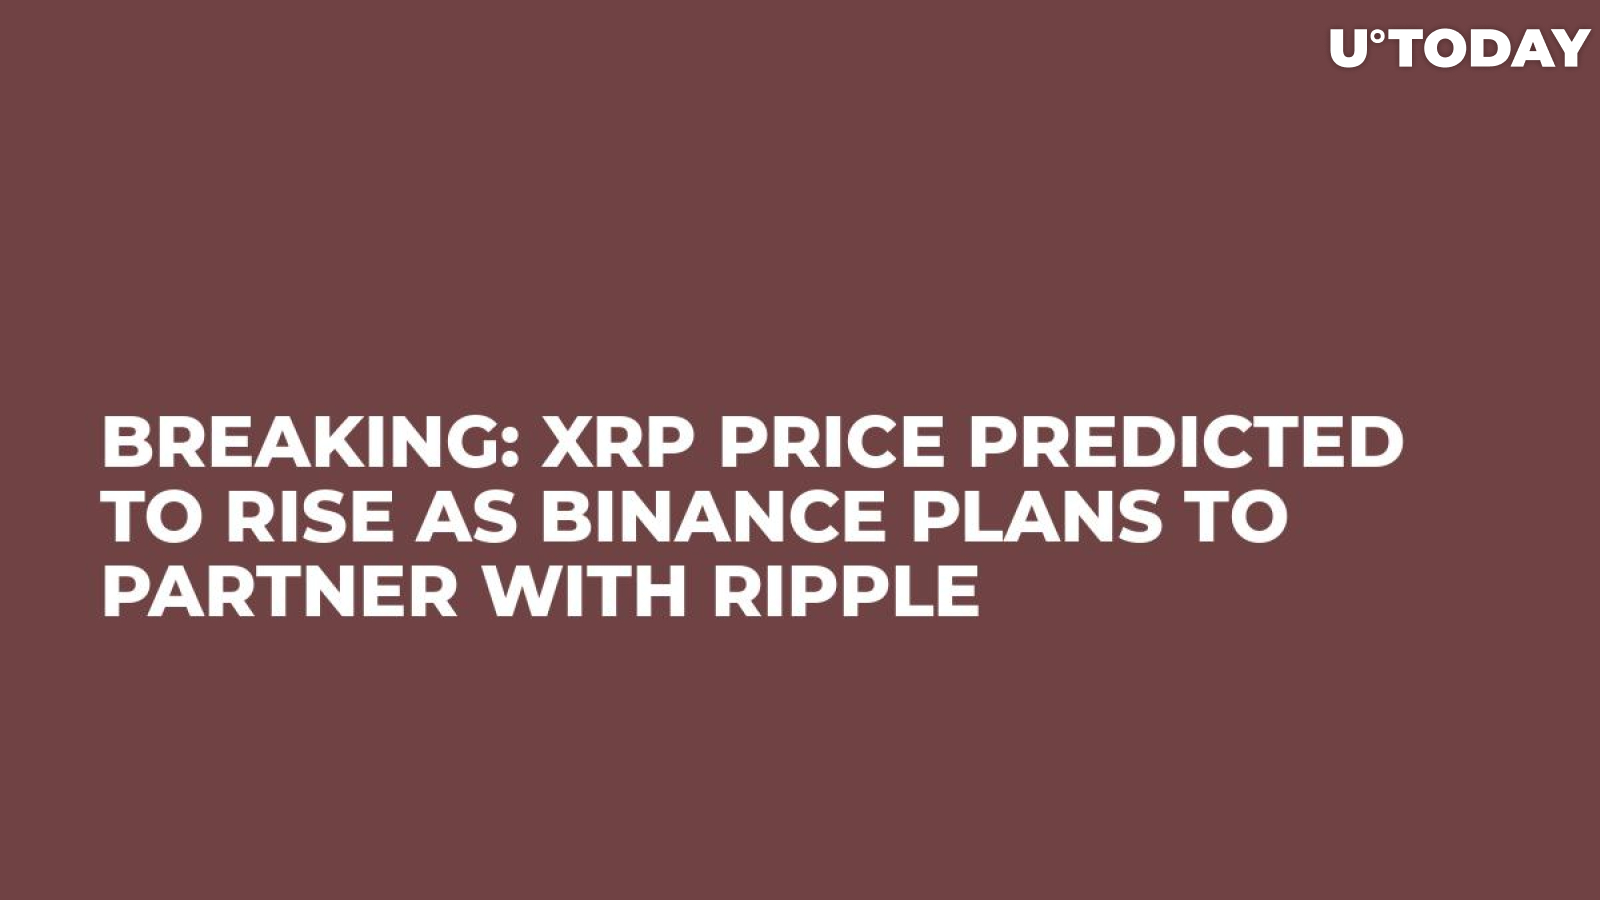 Breaking: XRP Price Predicted to Rise as Binance Plans to Partner with Ripple